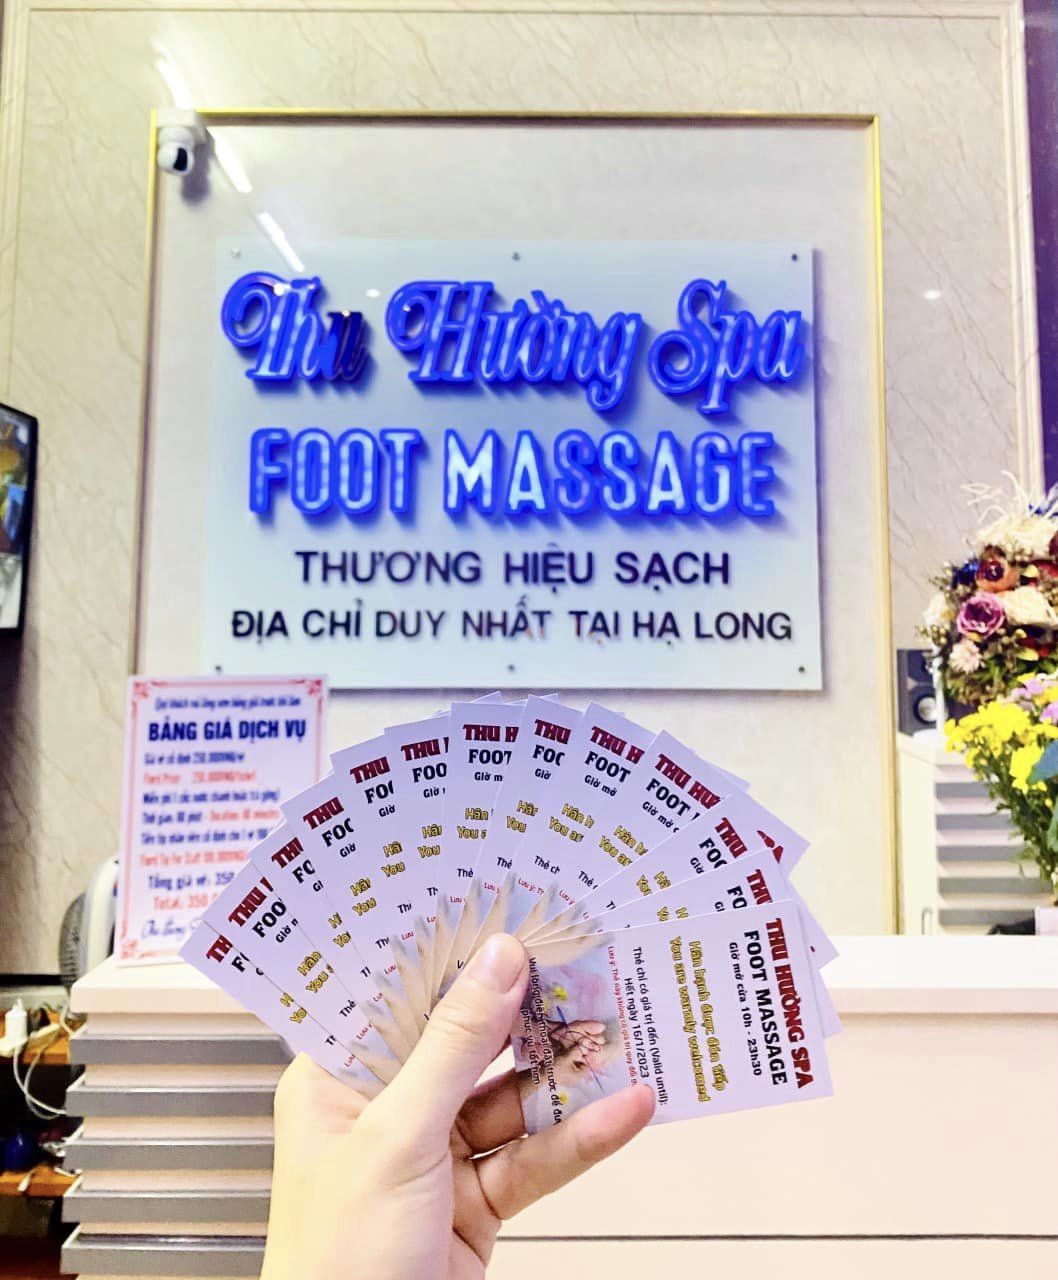 Thu Huong spa is super famous for its foot massage service